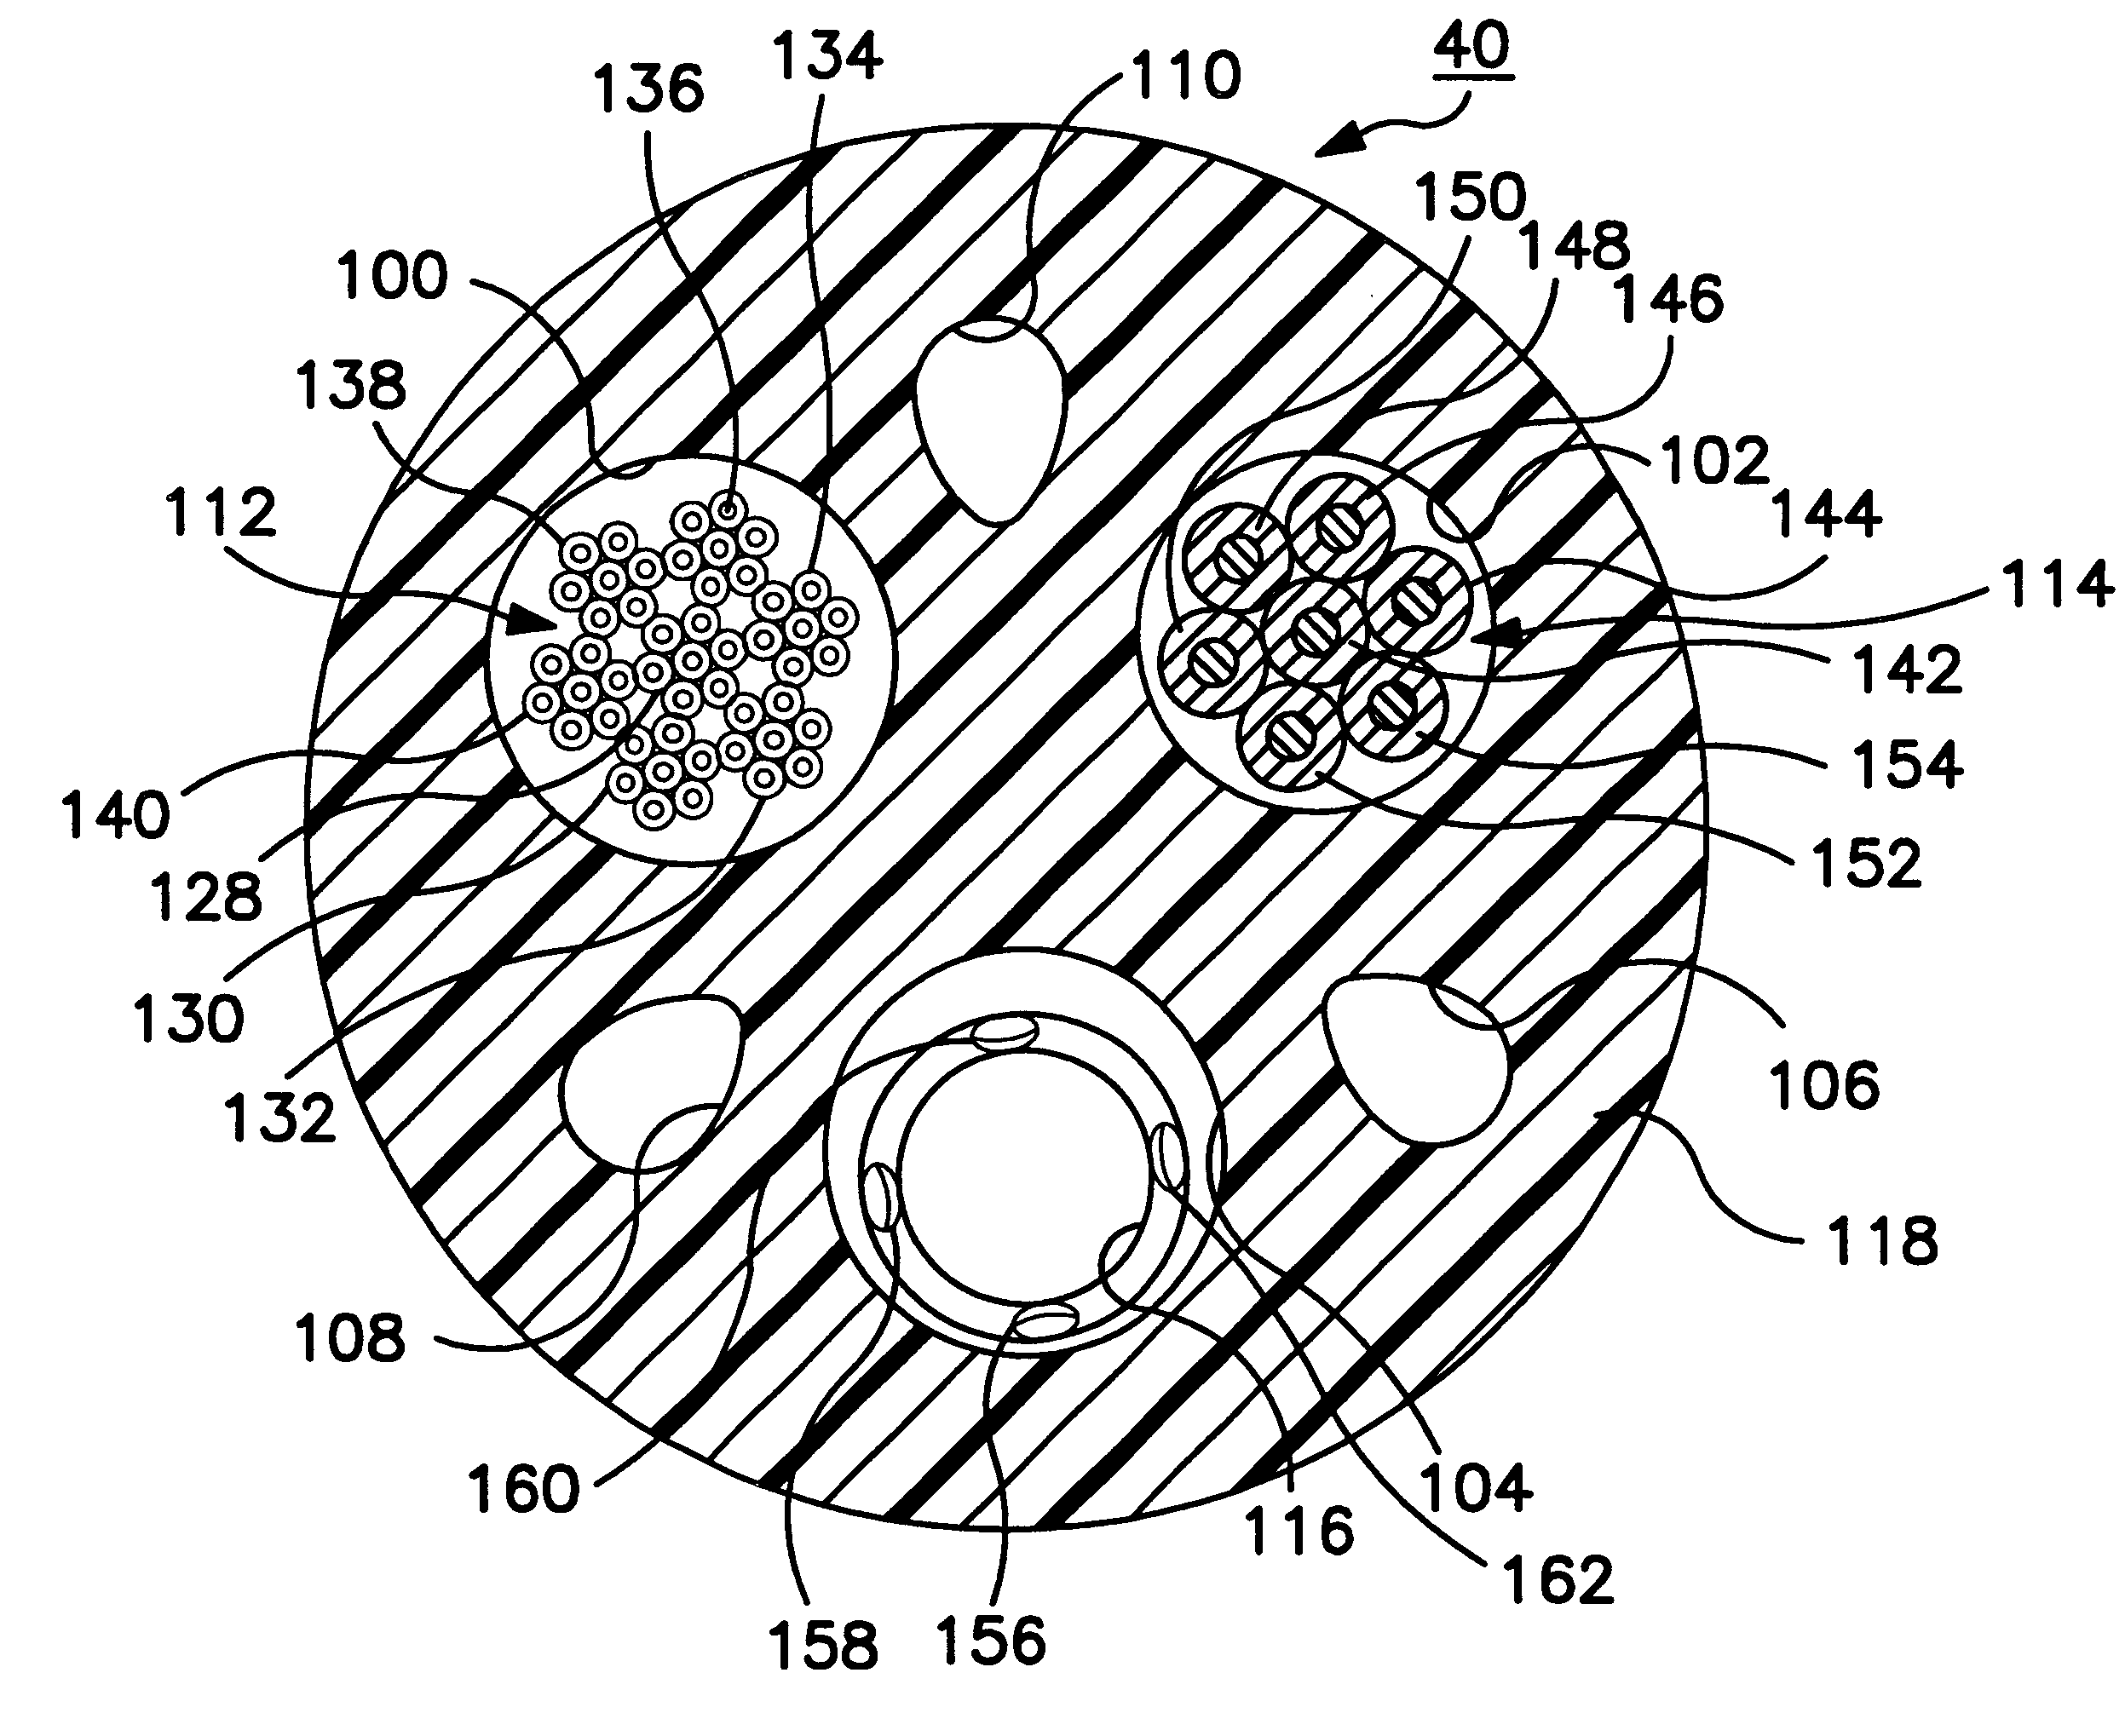 Medical lead conductor fracture visualization method and apparatus